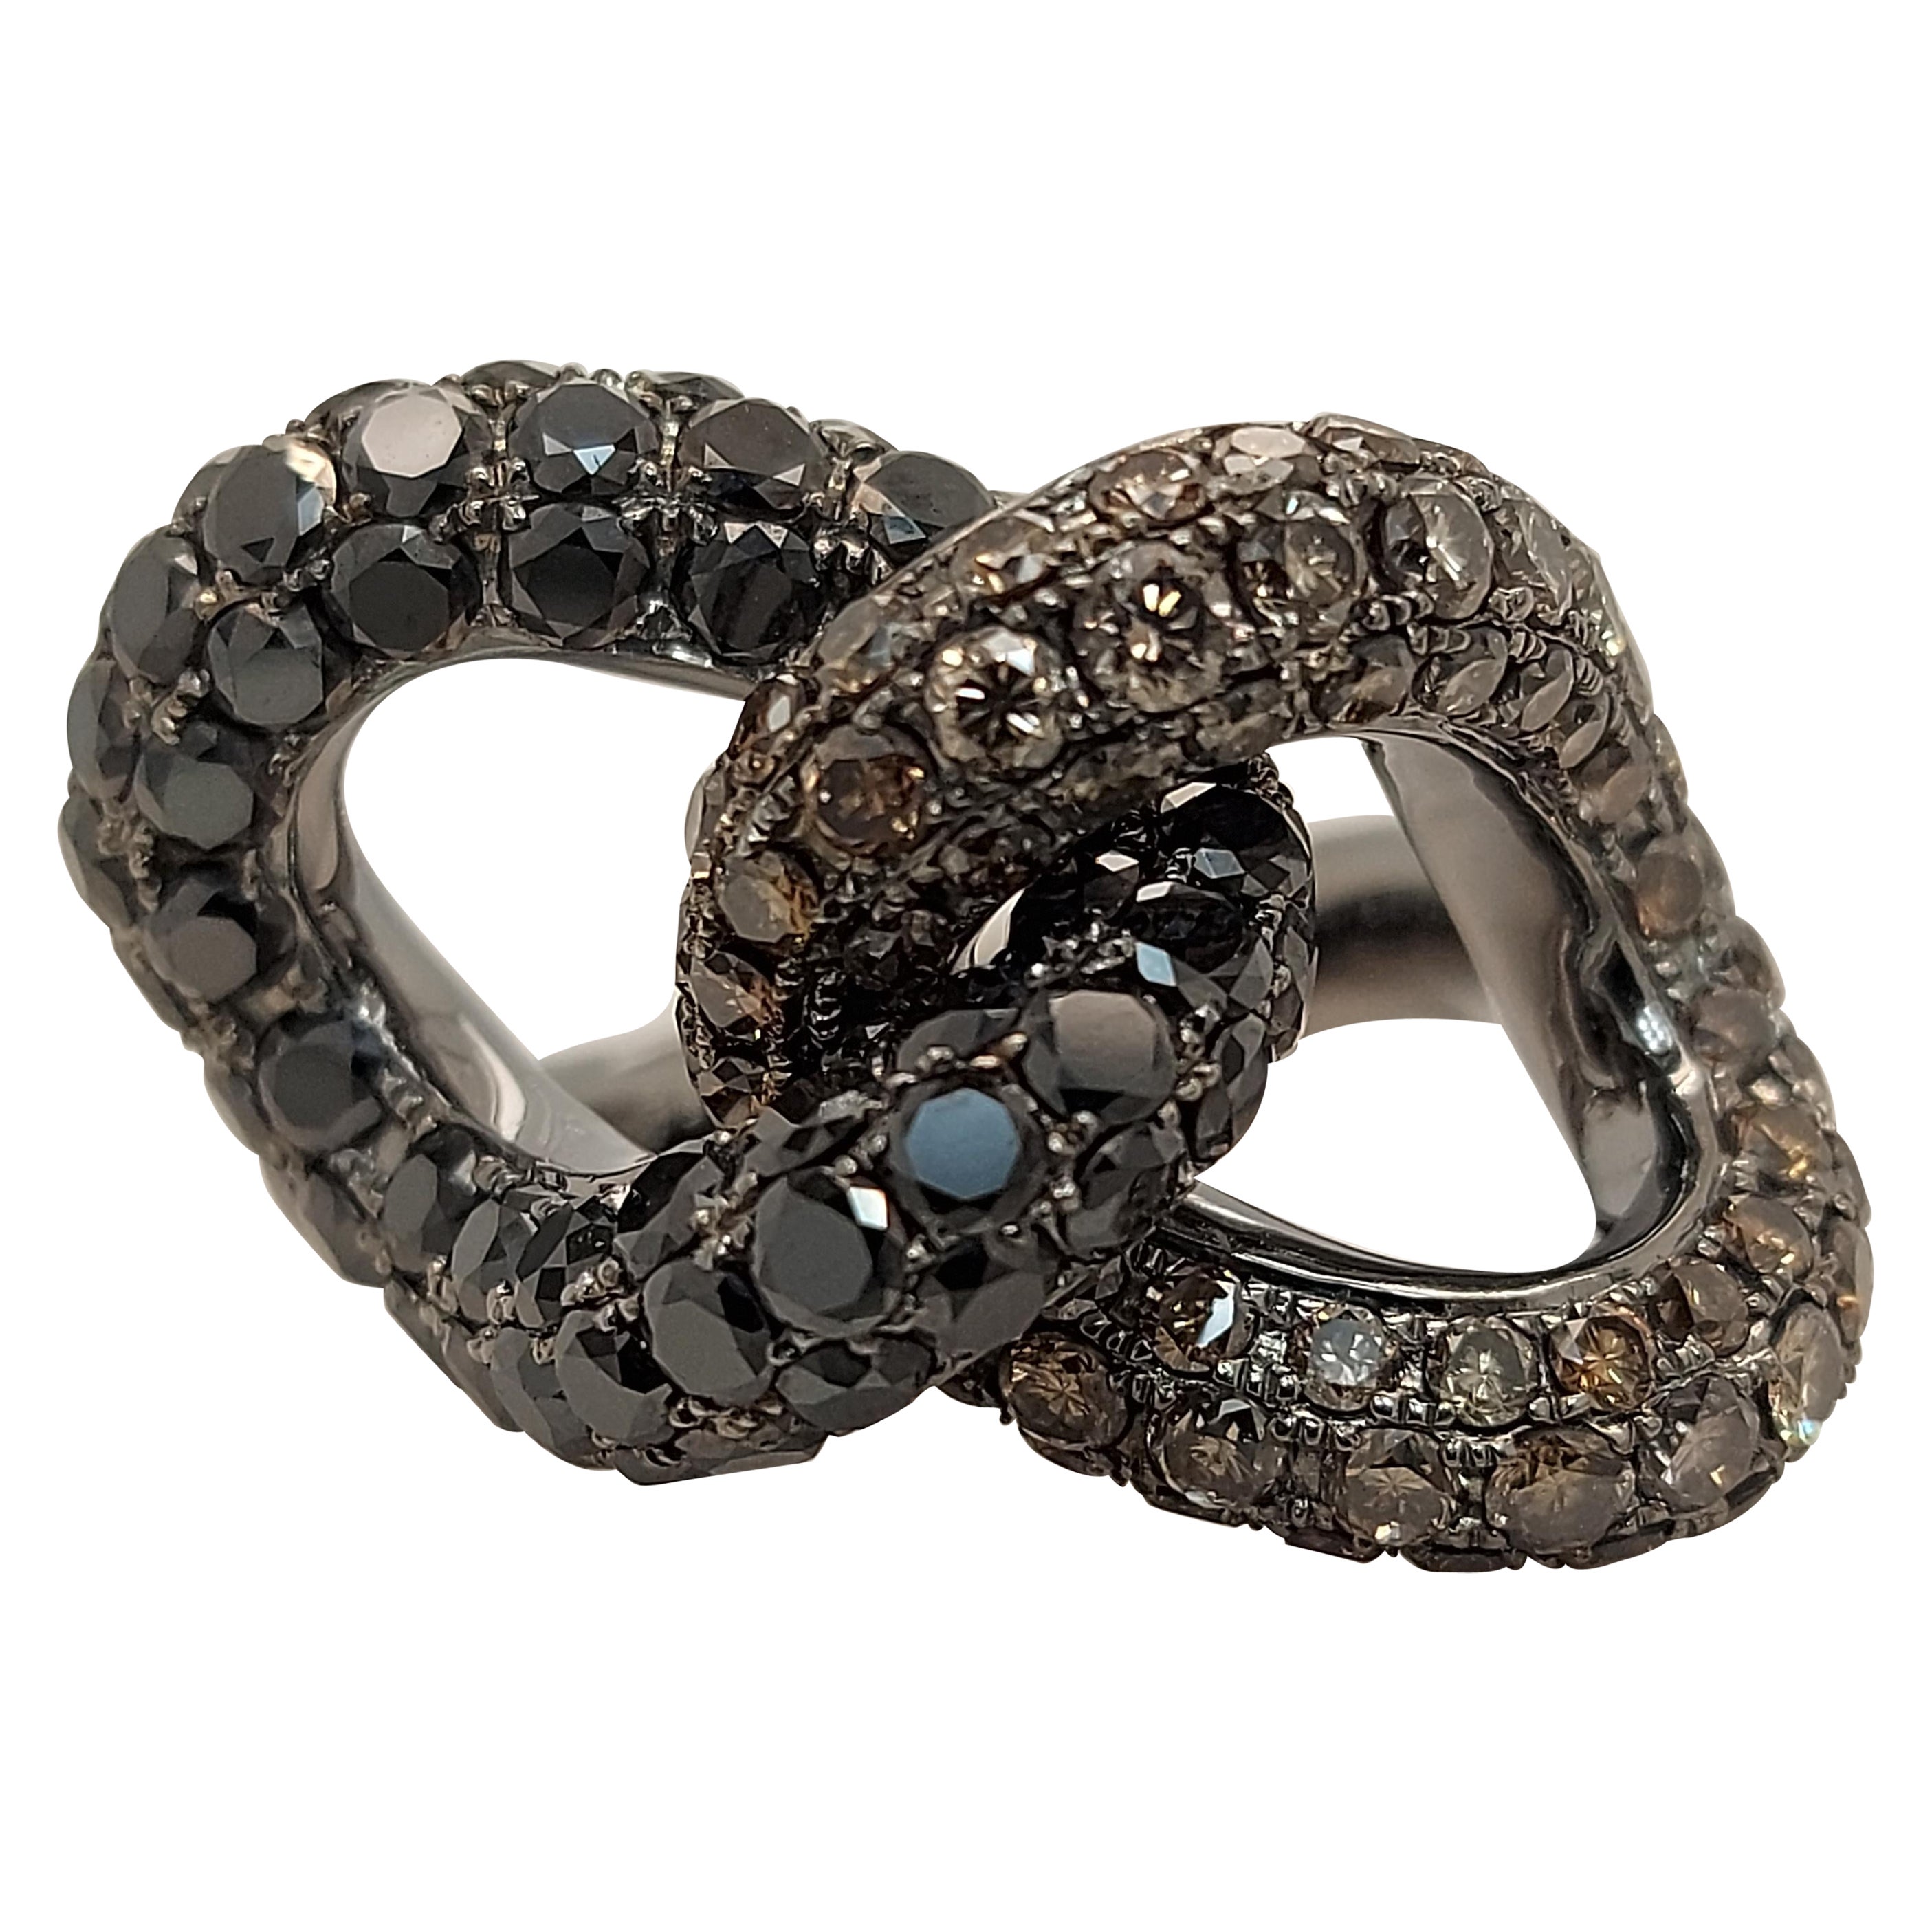 Magnificent 18kt White Gold Ring with 5.3ct Cognac & Black Diamonds, Black Rodiu For Sale